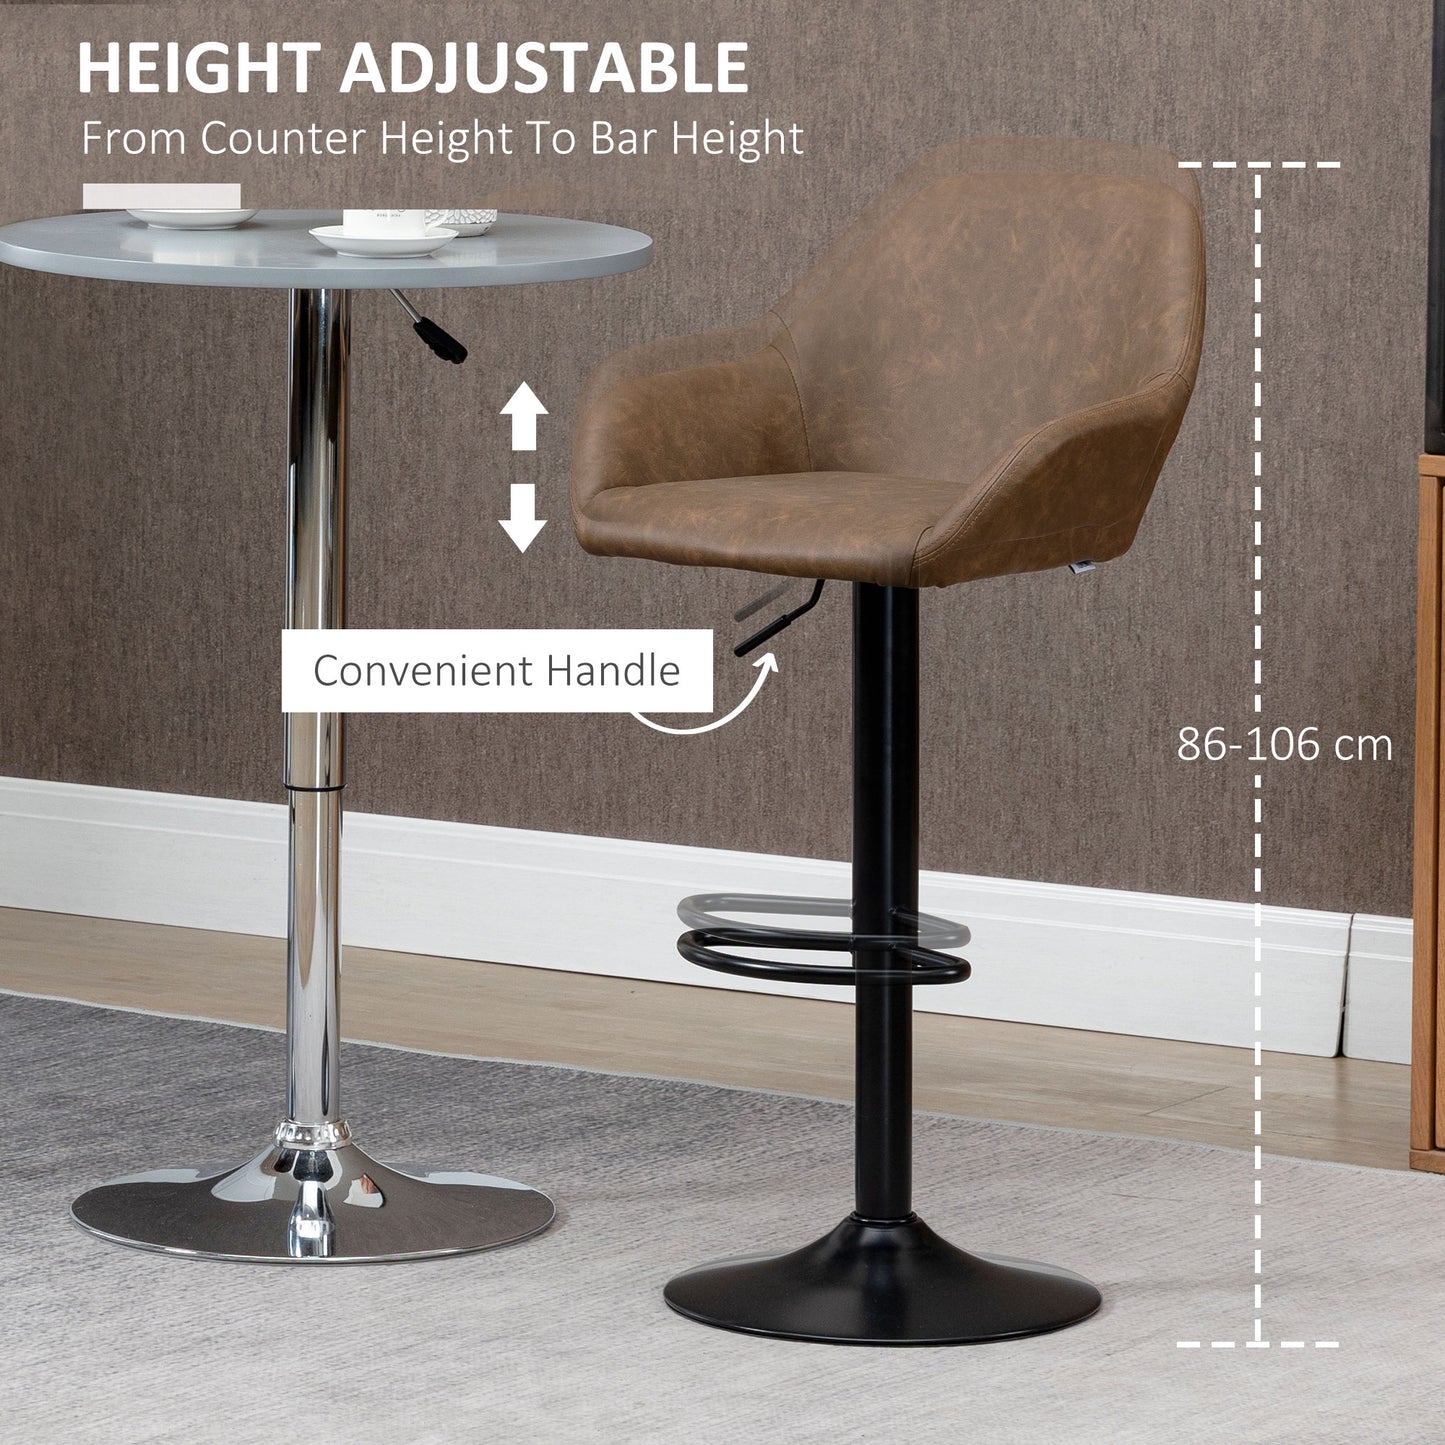 HOMCOM Adjustable Bar Stools Set of 2, Swivel Barstools with Footrest and Backrest, PU Leather and Steel Base, for Kitchen Counter and Dining Room, Dark Brown